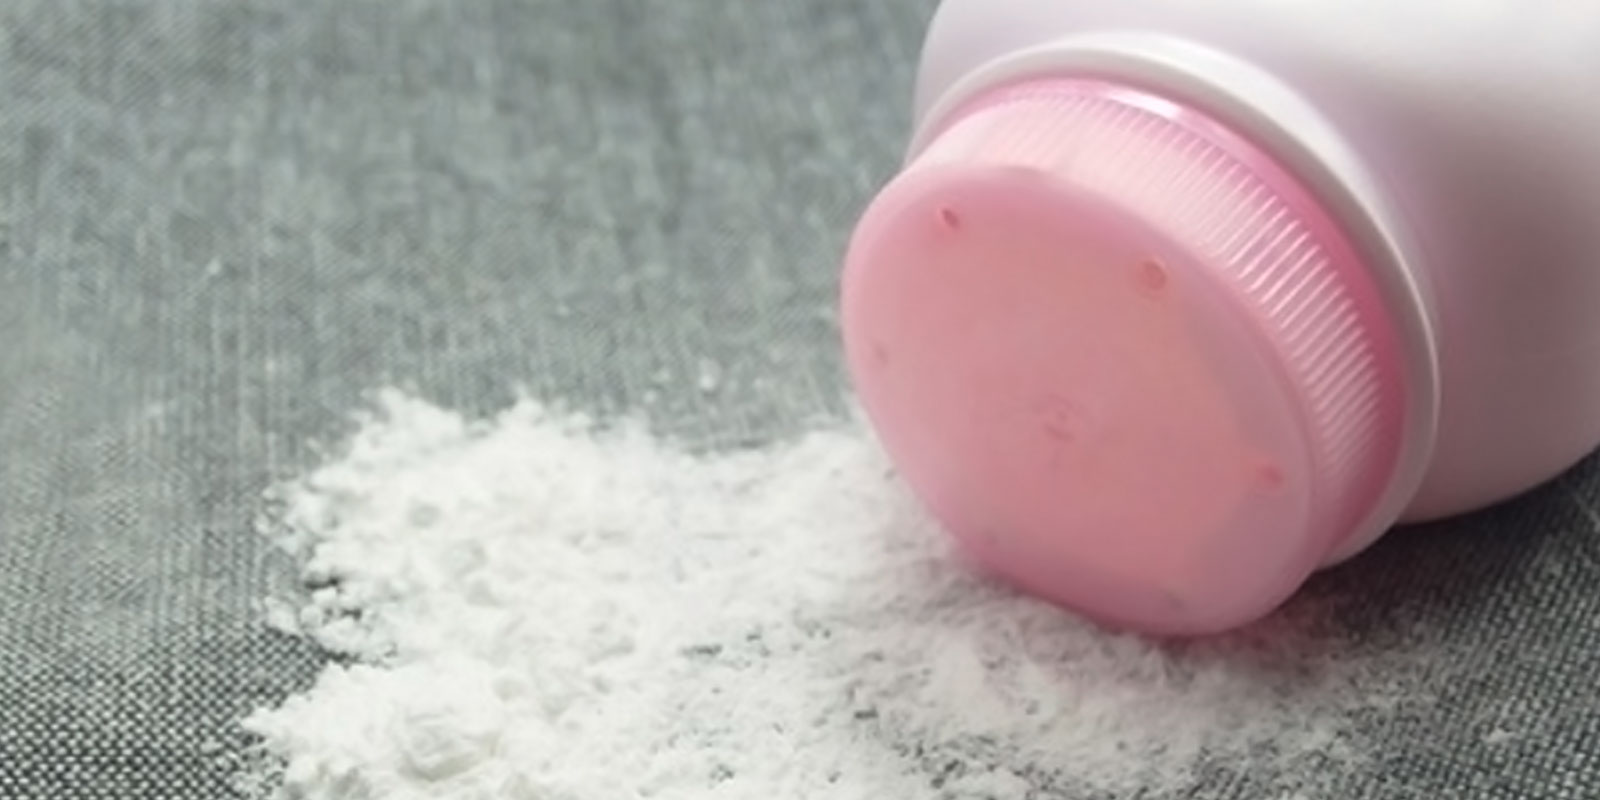 Hire A Talcum Powder Lawsuit Lawyer If You've Been Diagnosed With Ovarian Cancer.